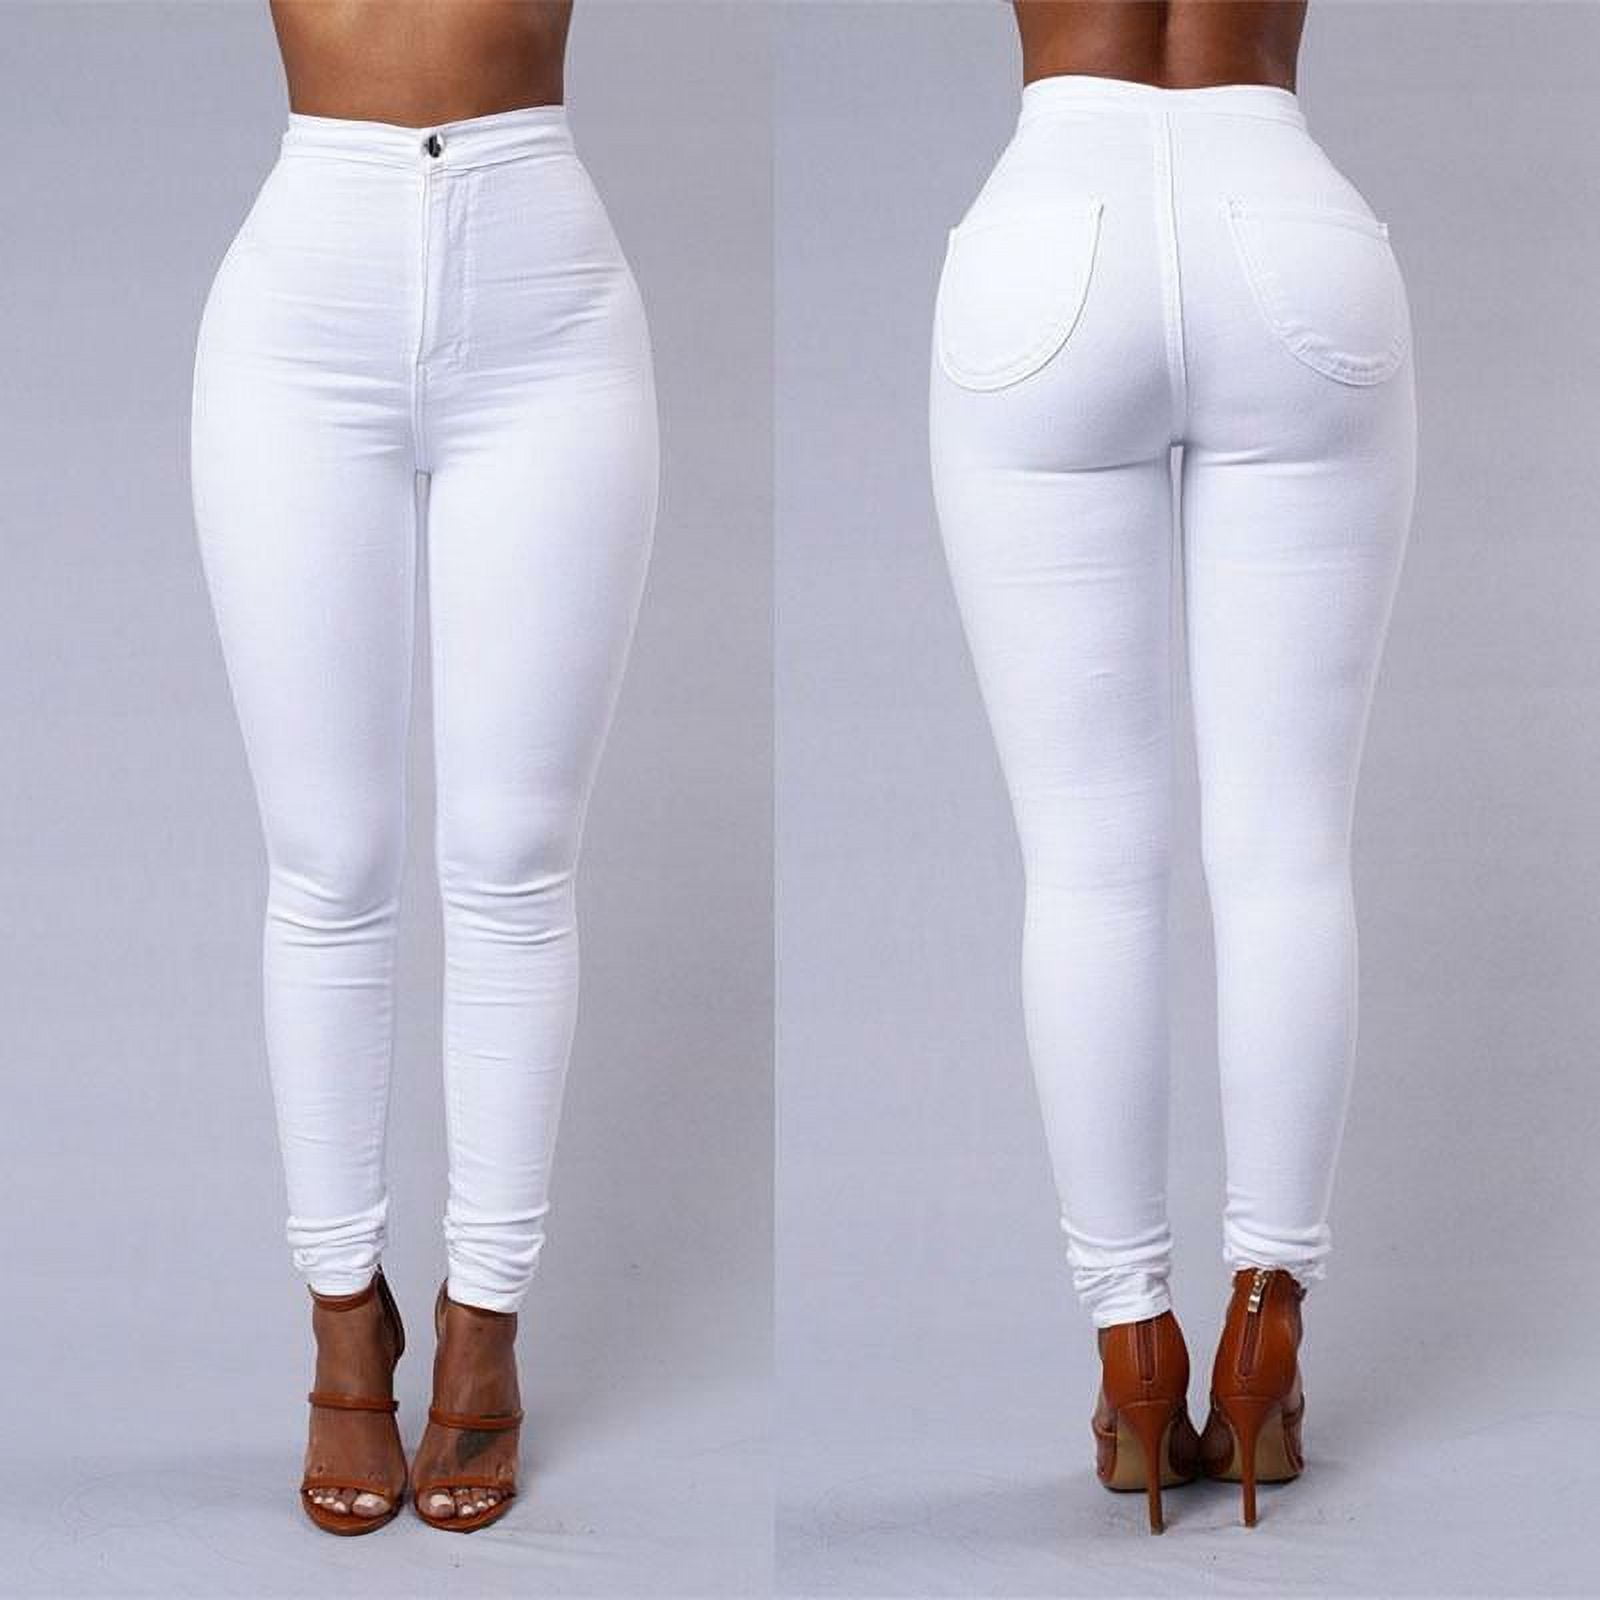 High Waisted Elastic Skinny Pencil Jeans For Women Sexy And Thin Section  Denim Drawstring Leggings 201223 From Lu003, $25.8